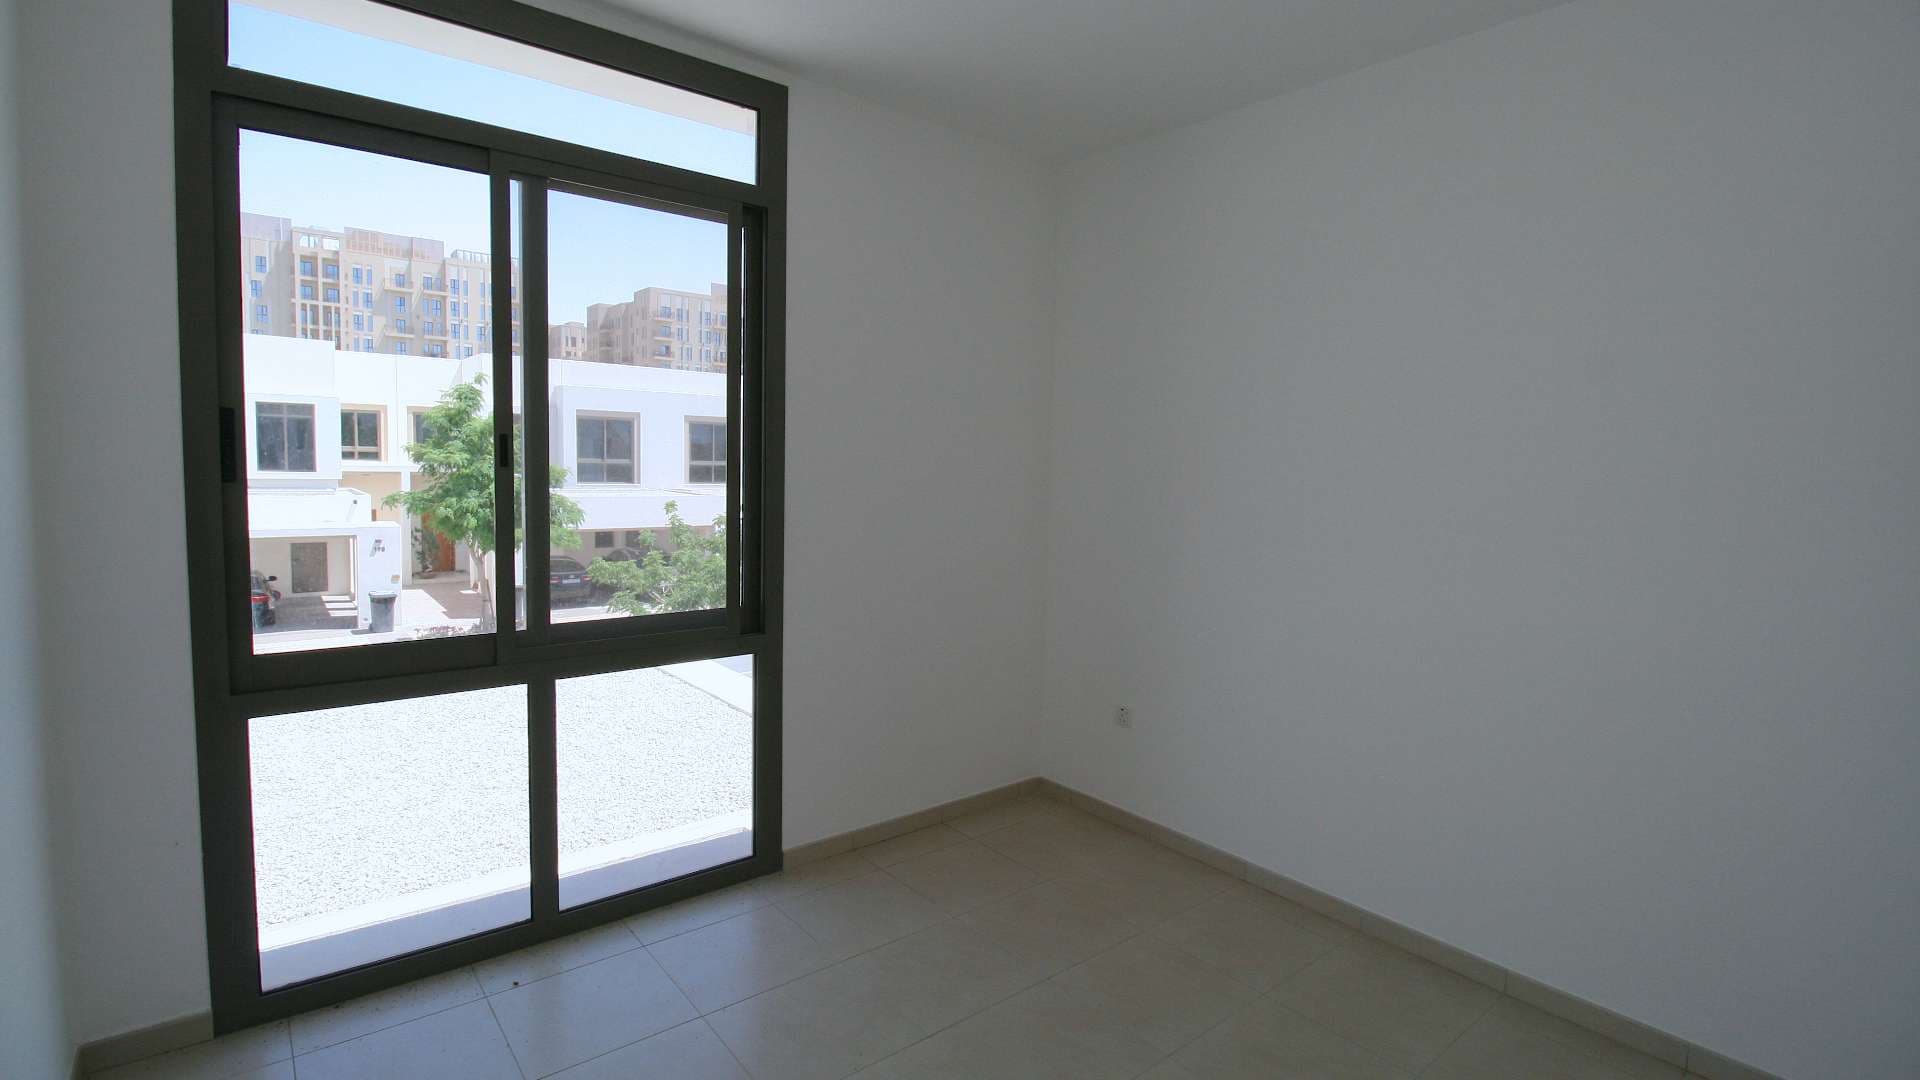 3 Bedroom Townhouse For Sale Zahra Townhouses Lp07624 27a5b57a5b9a1000.jpg